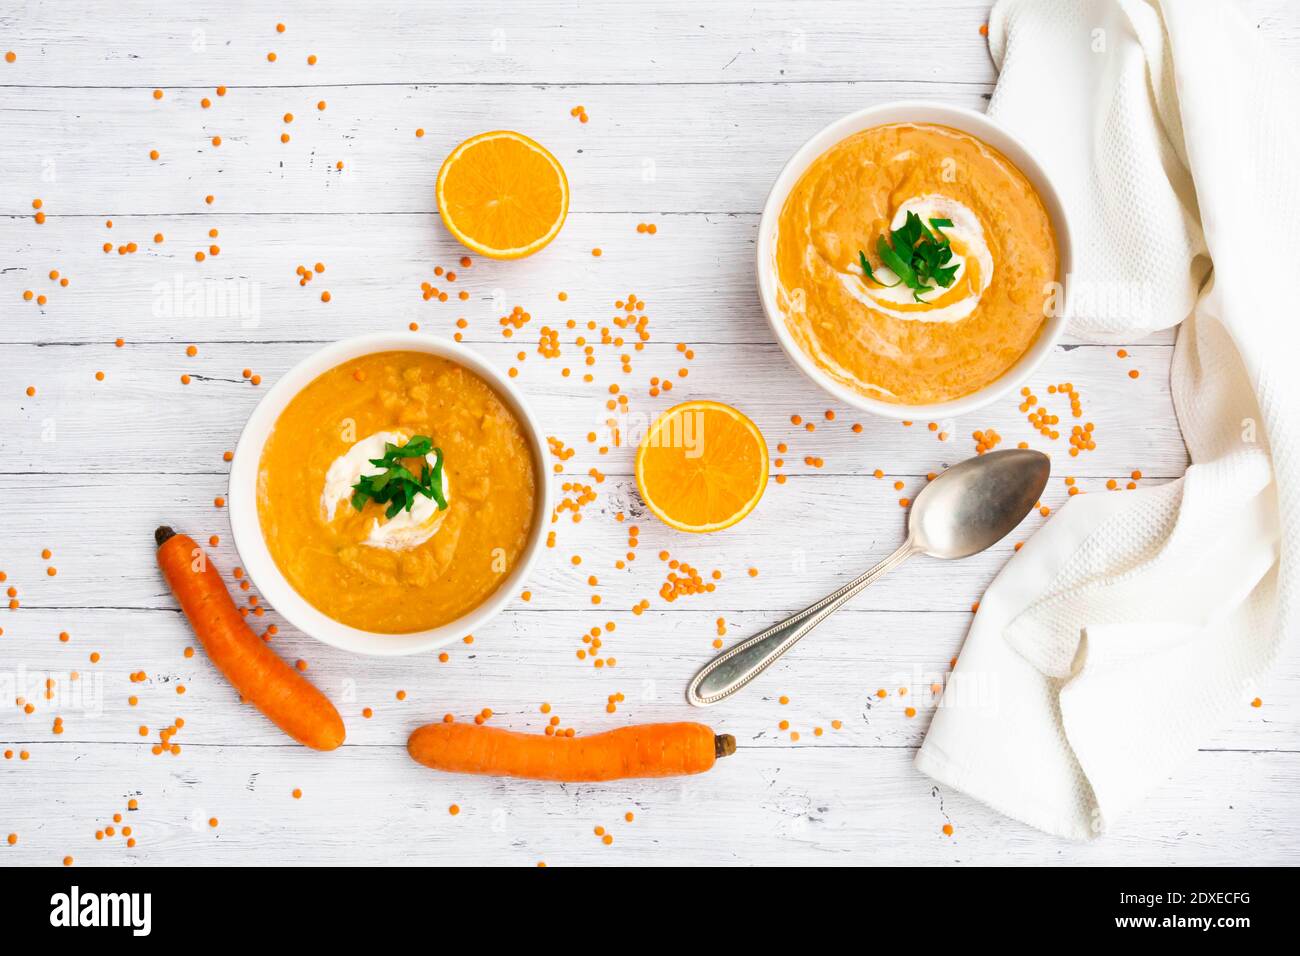 Two bowls of vegetarian lentil soup with carrots, orange juice, creme fraiche and parsley Stock Photo